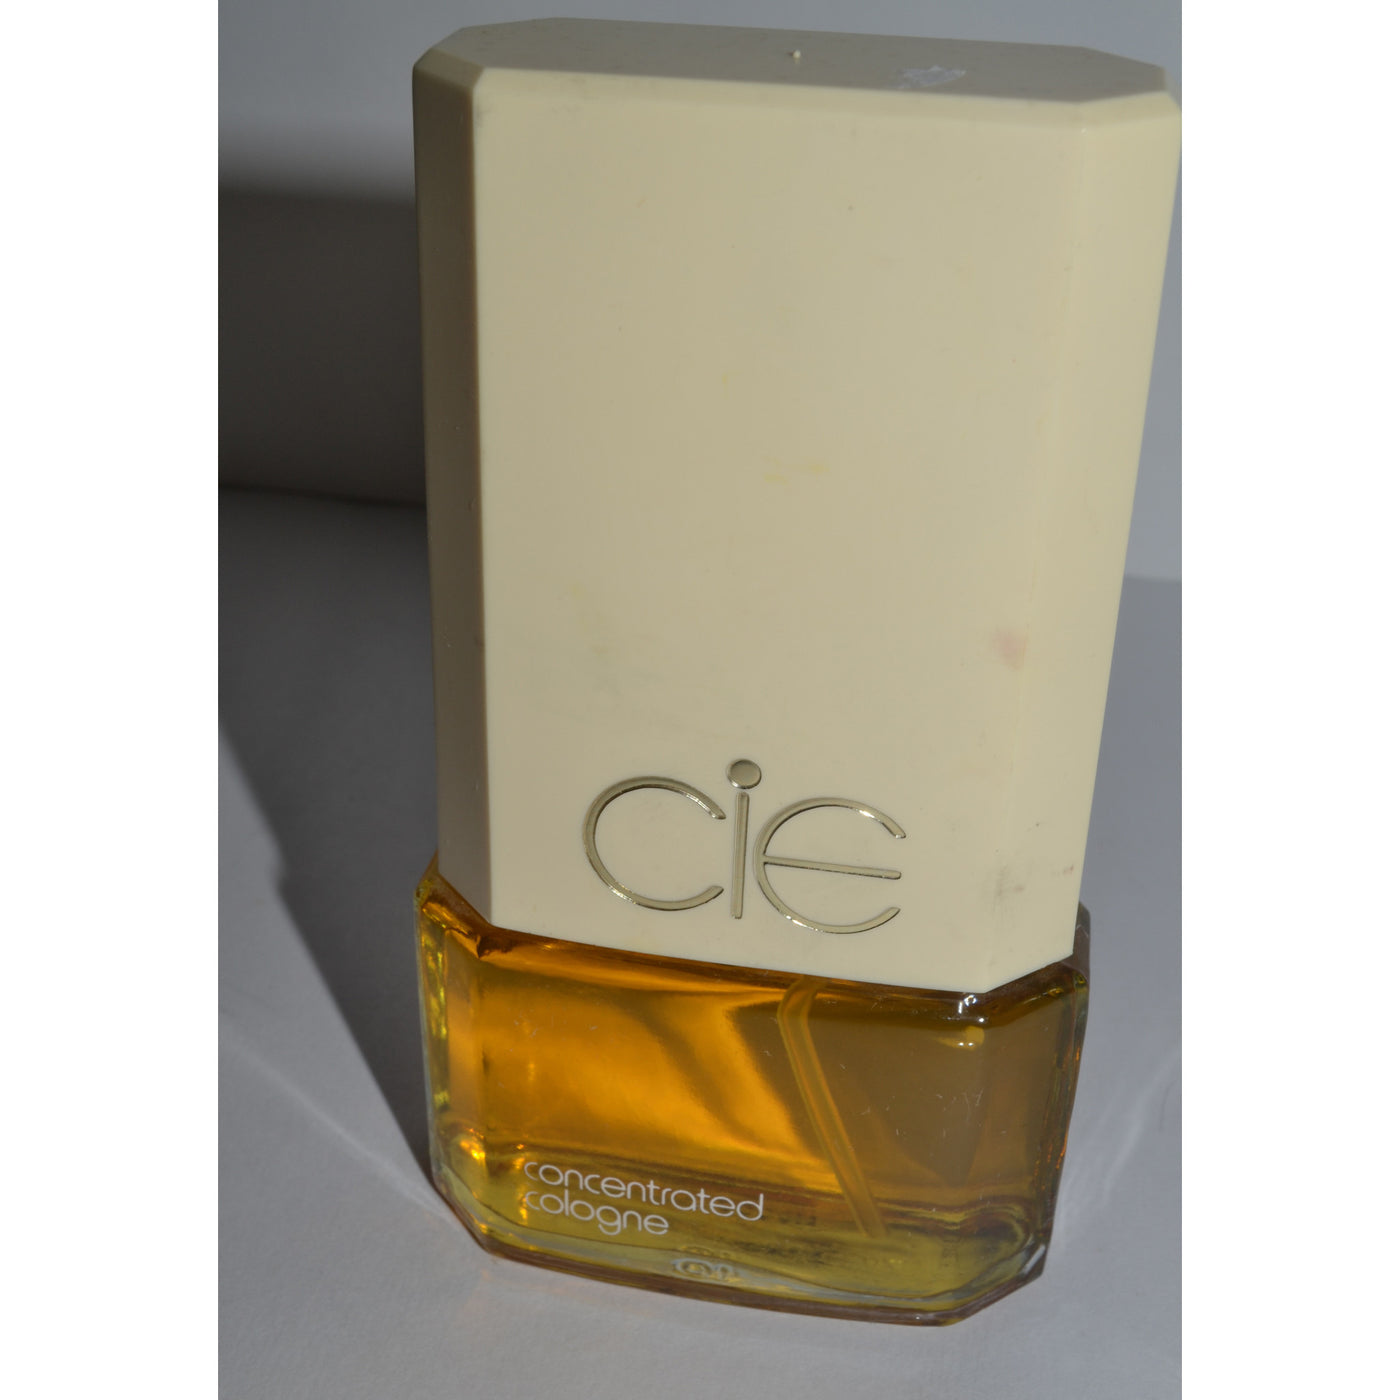 Vintage Shulton CIE Concentrated Cologne